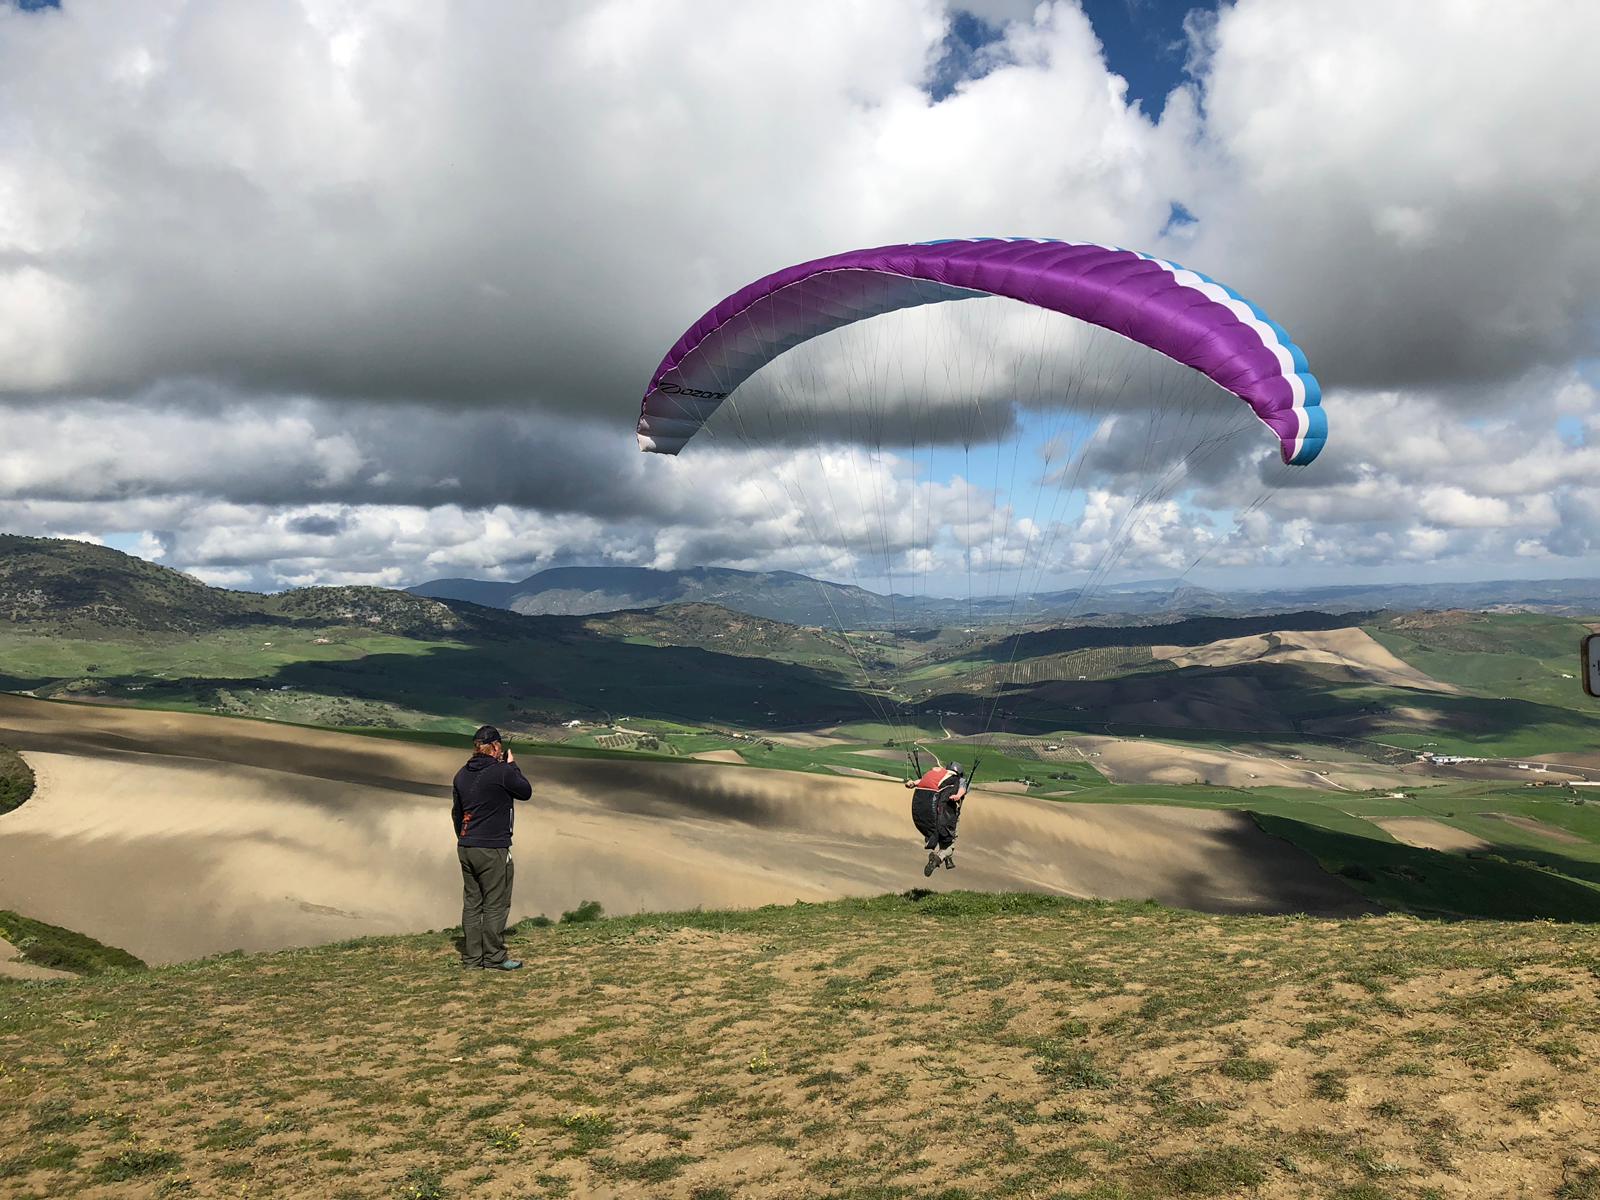 Great results this year already for qualified paraglider pIlots